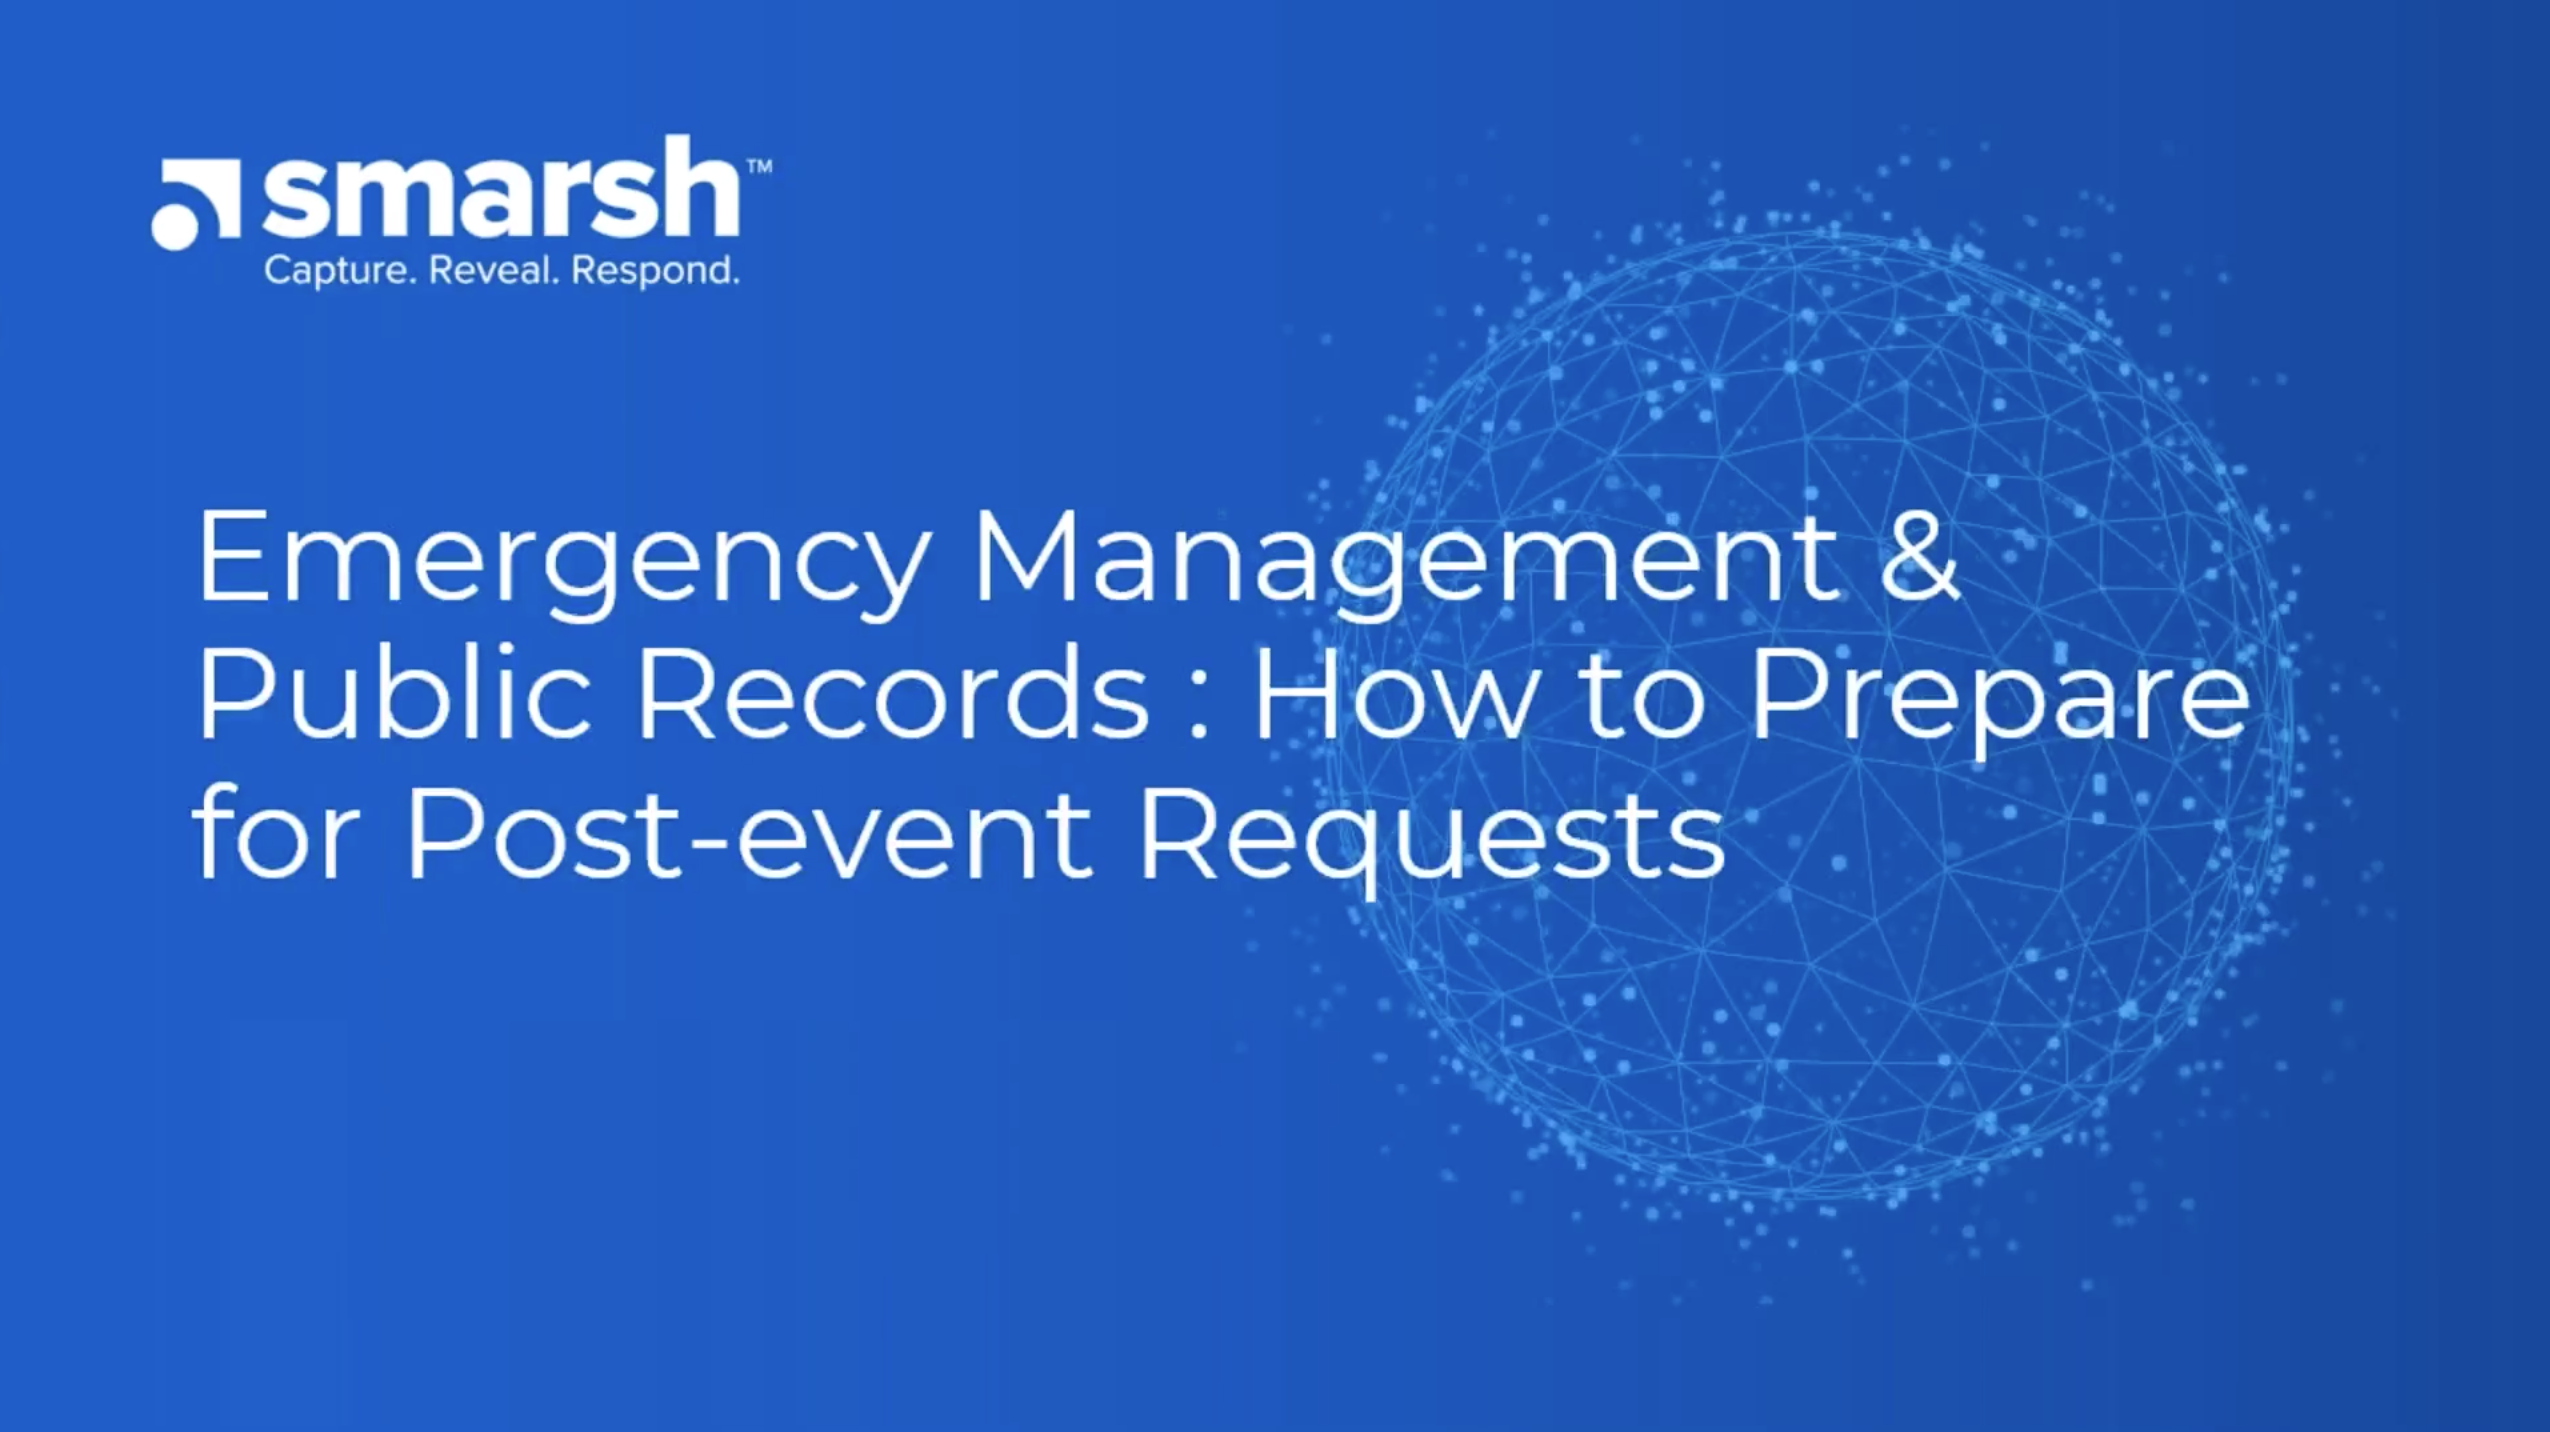 how to prep for post-event requests webinar